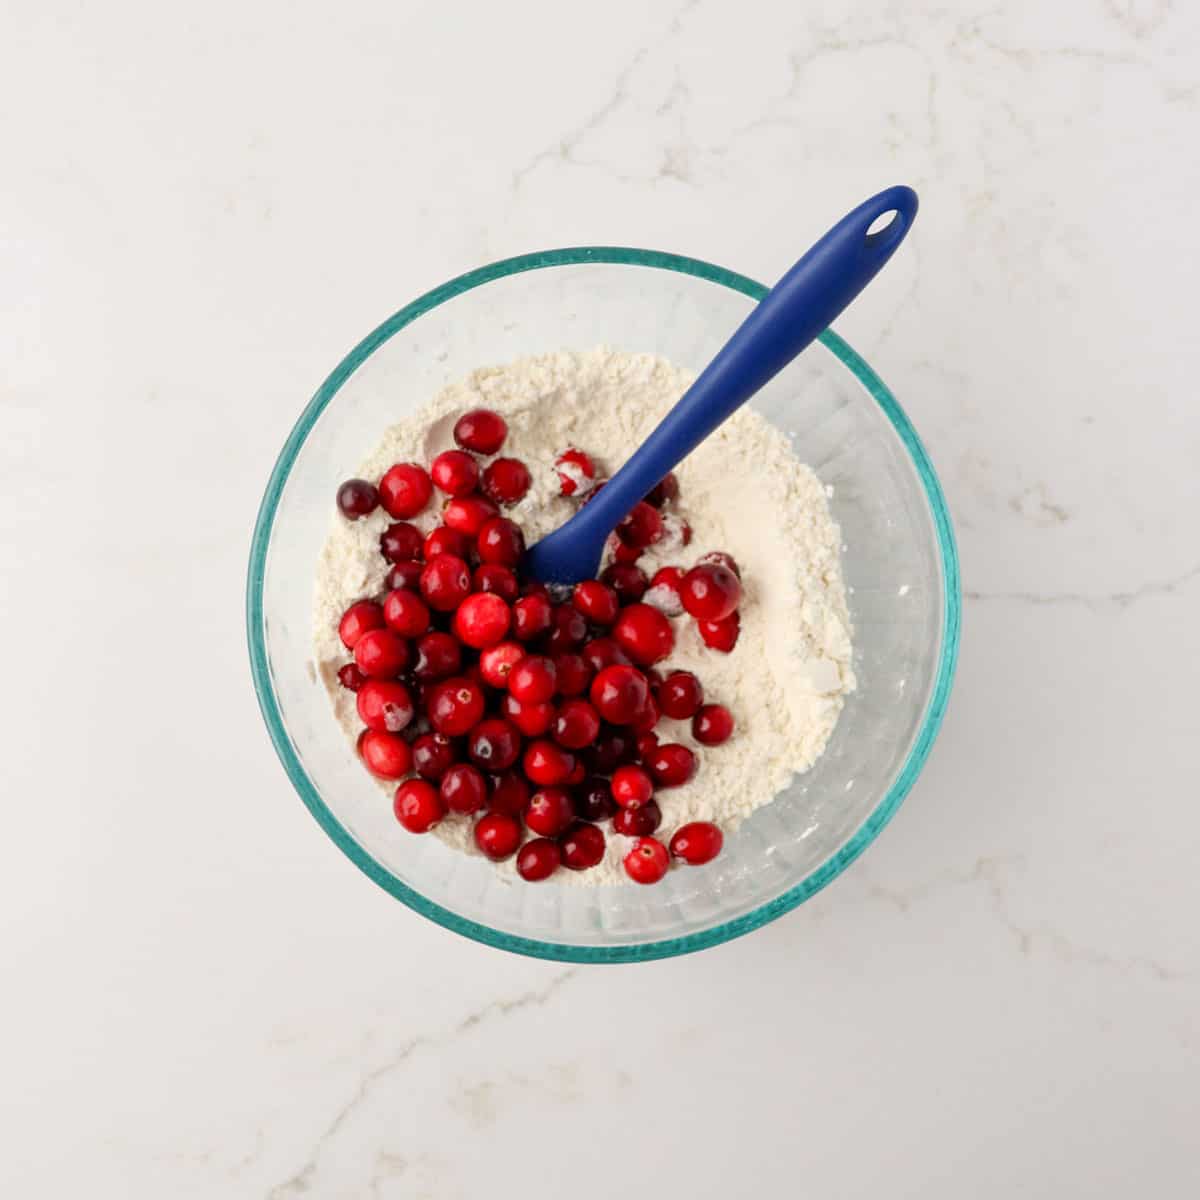 Flour, baking soda, and baking powder combined in a bowl with fresh cranberries added.